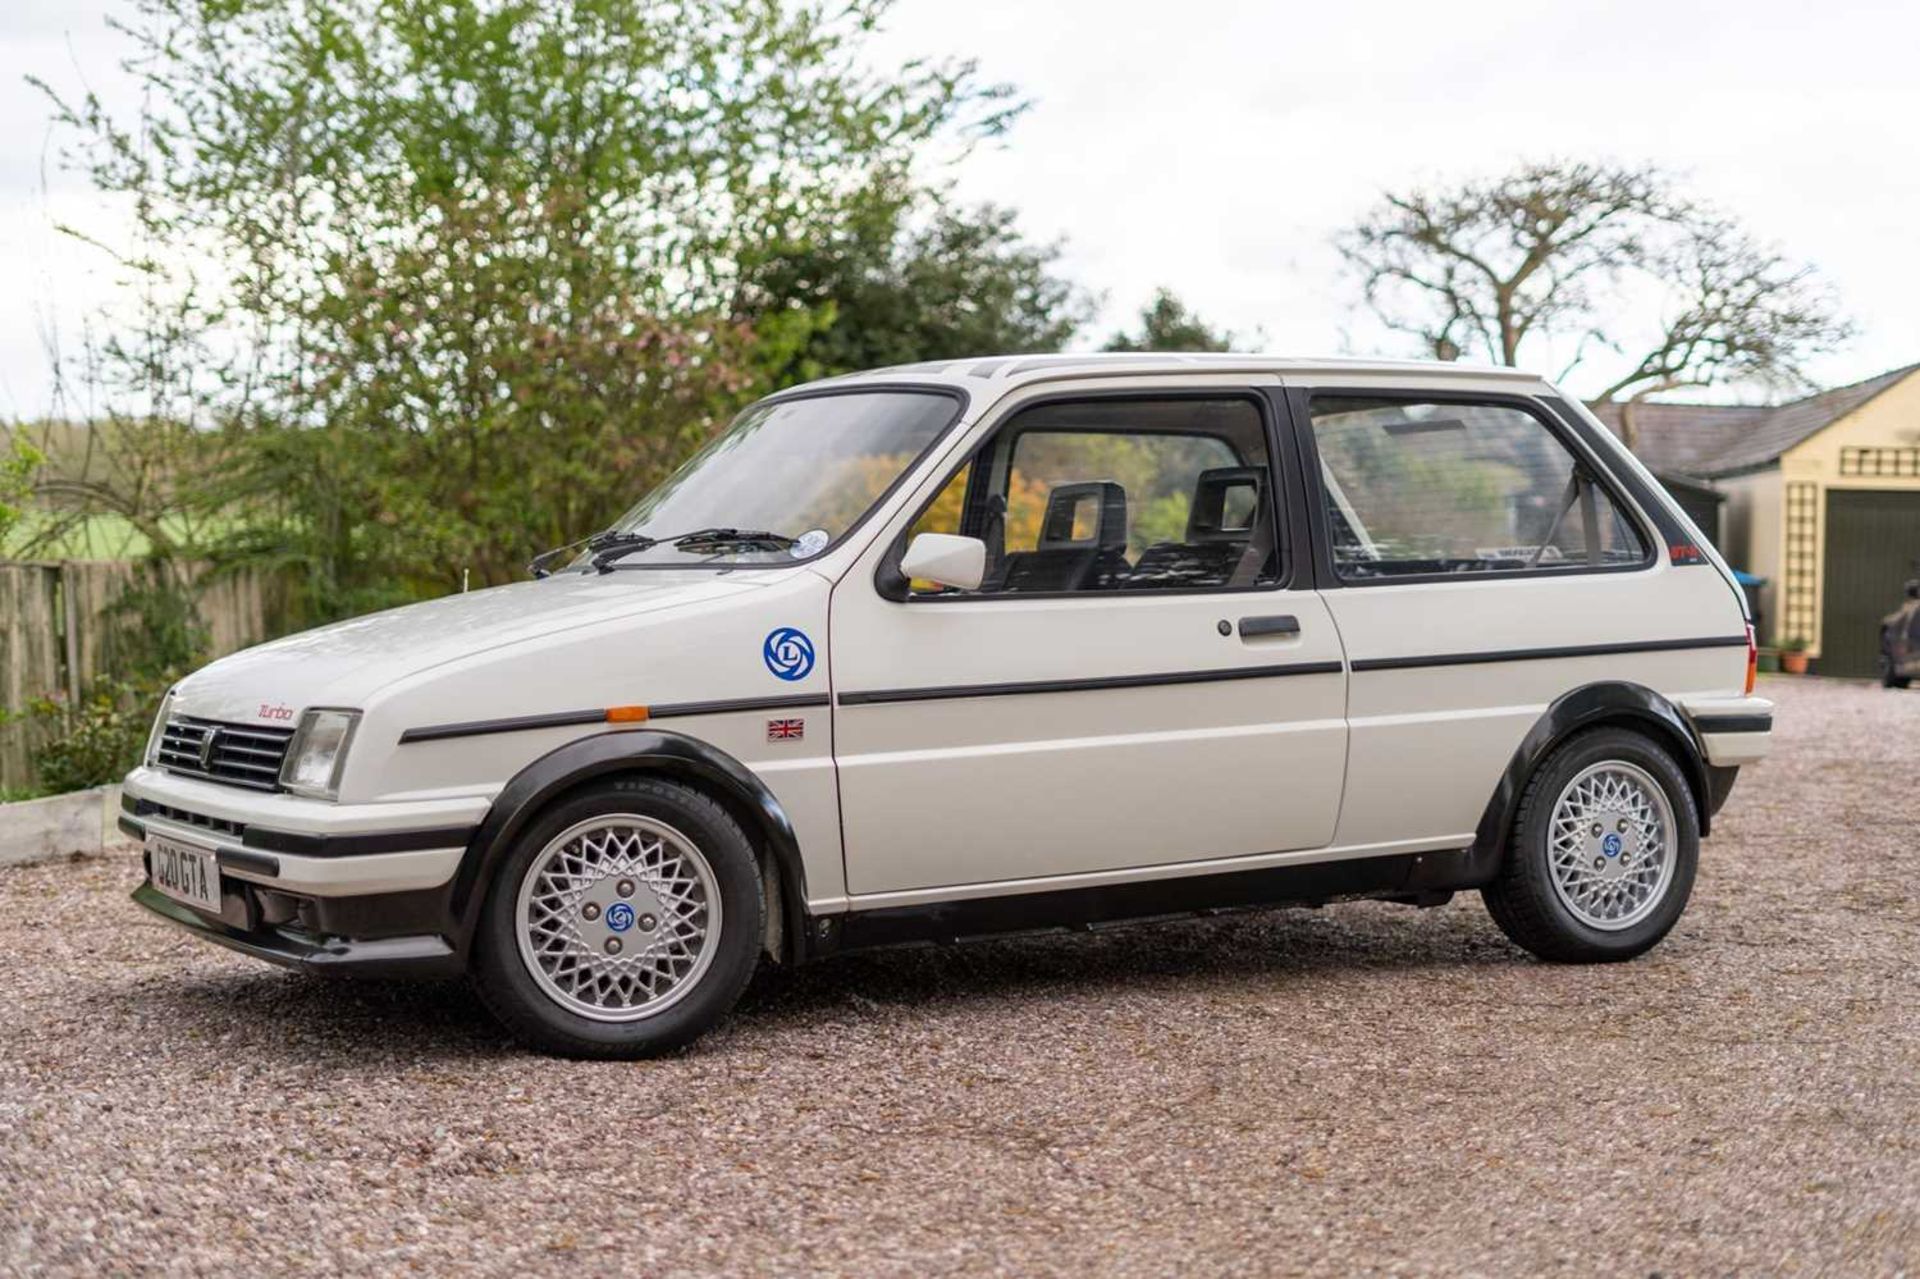 1989 Austin Metro GTa  Offered with the registration ‘G20 GTA’ and a fresh MOT - Image 2 of 53